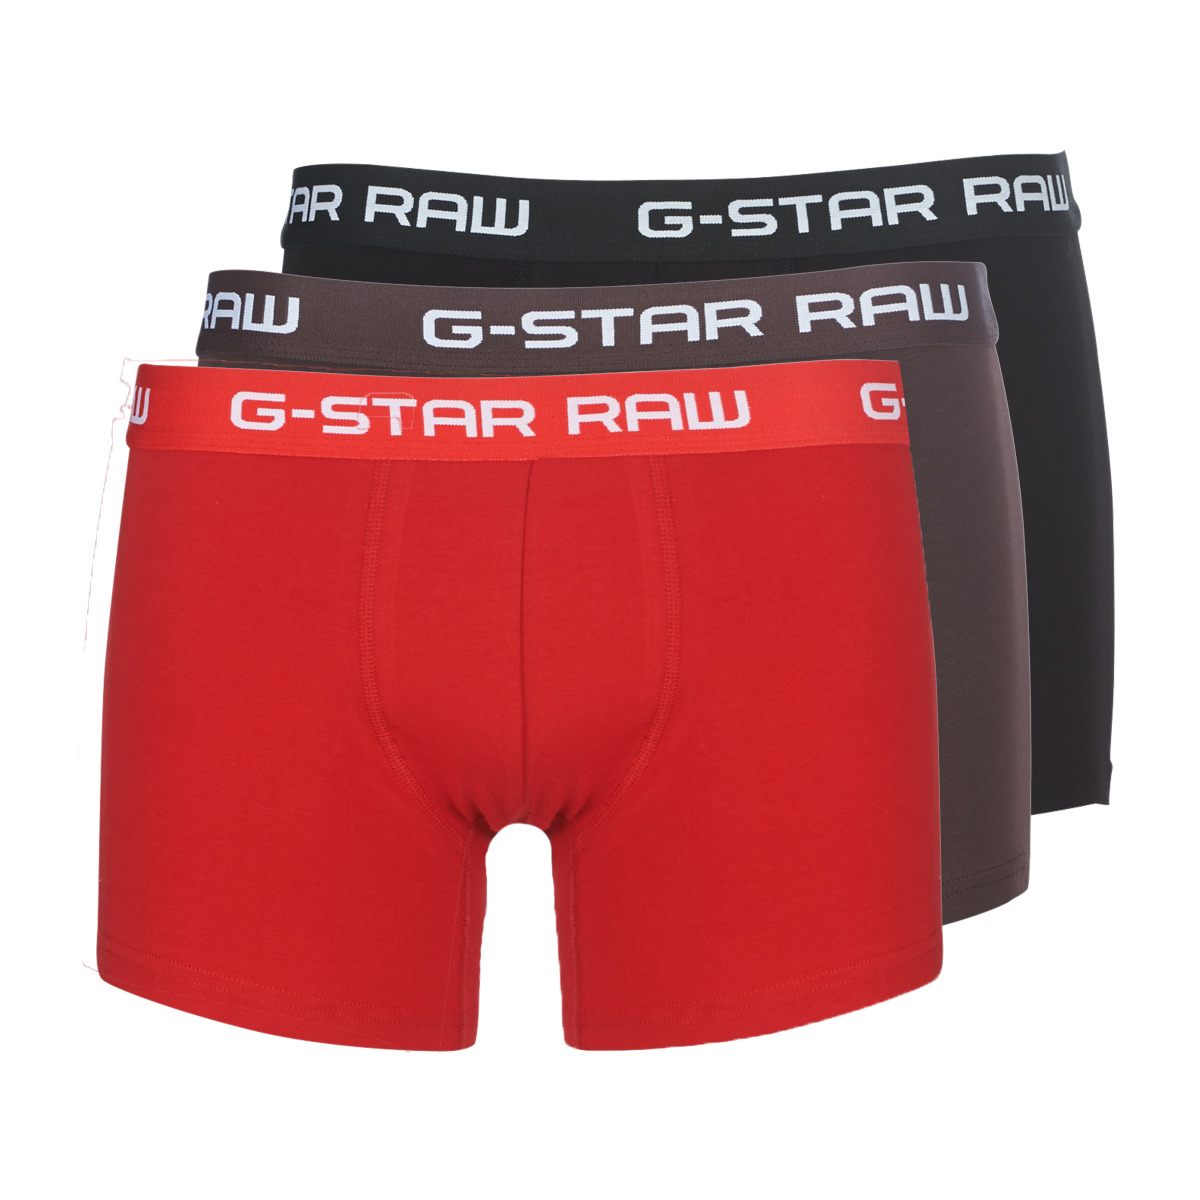 Boxer G-Star Raw CLASSIC TRUNK CLR 3 PACK